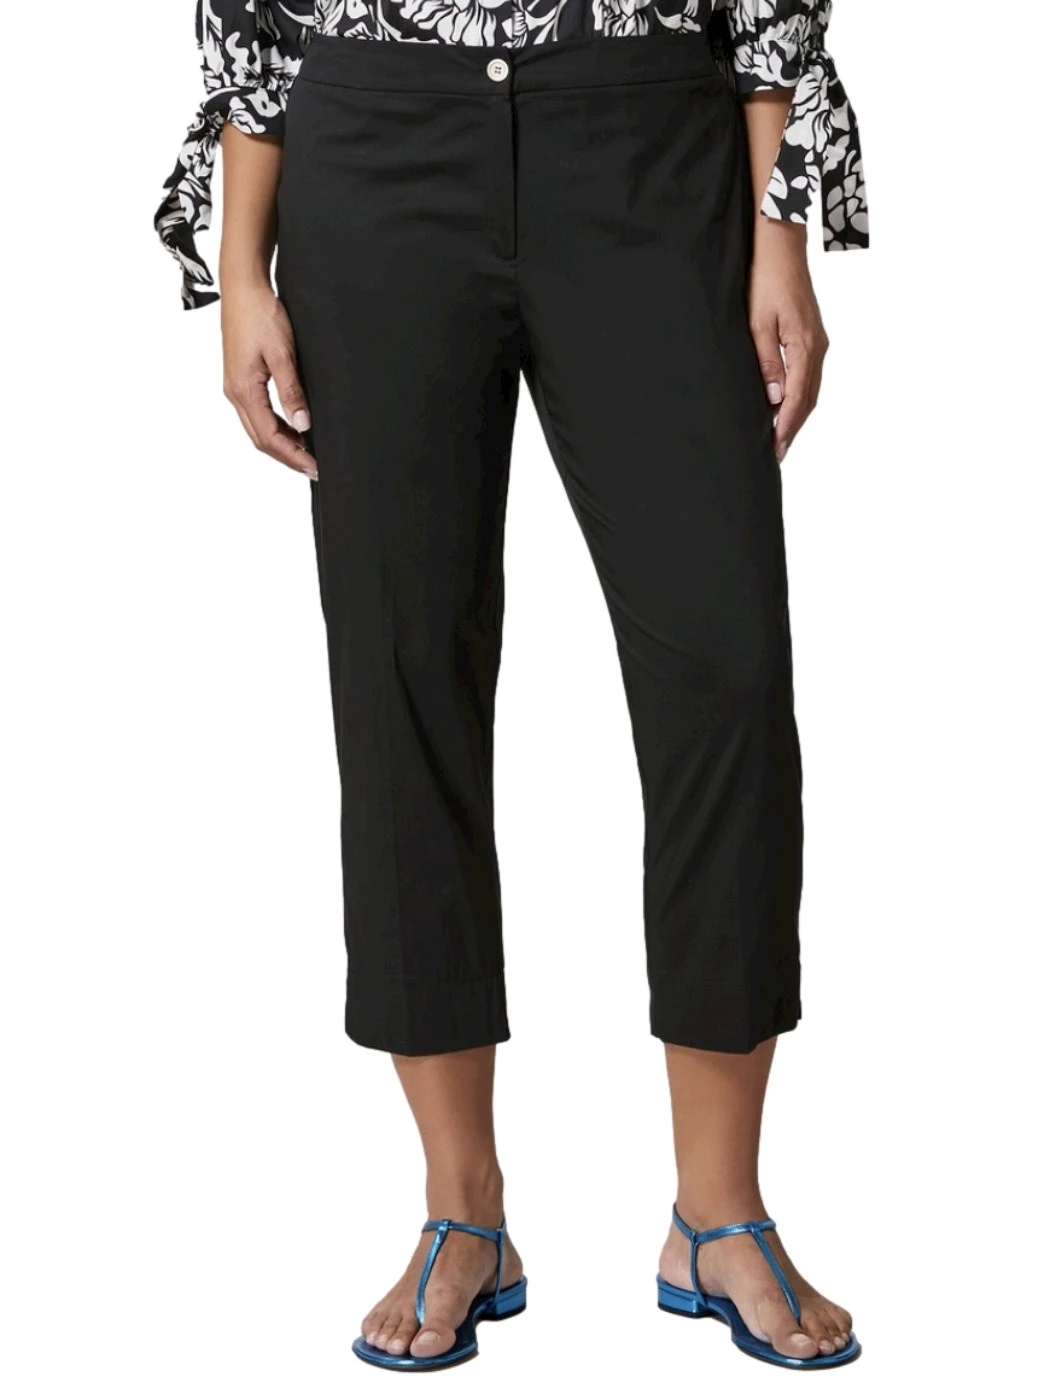 Persona stretch cotton and nylon trousers